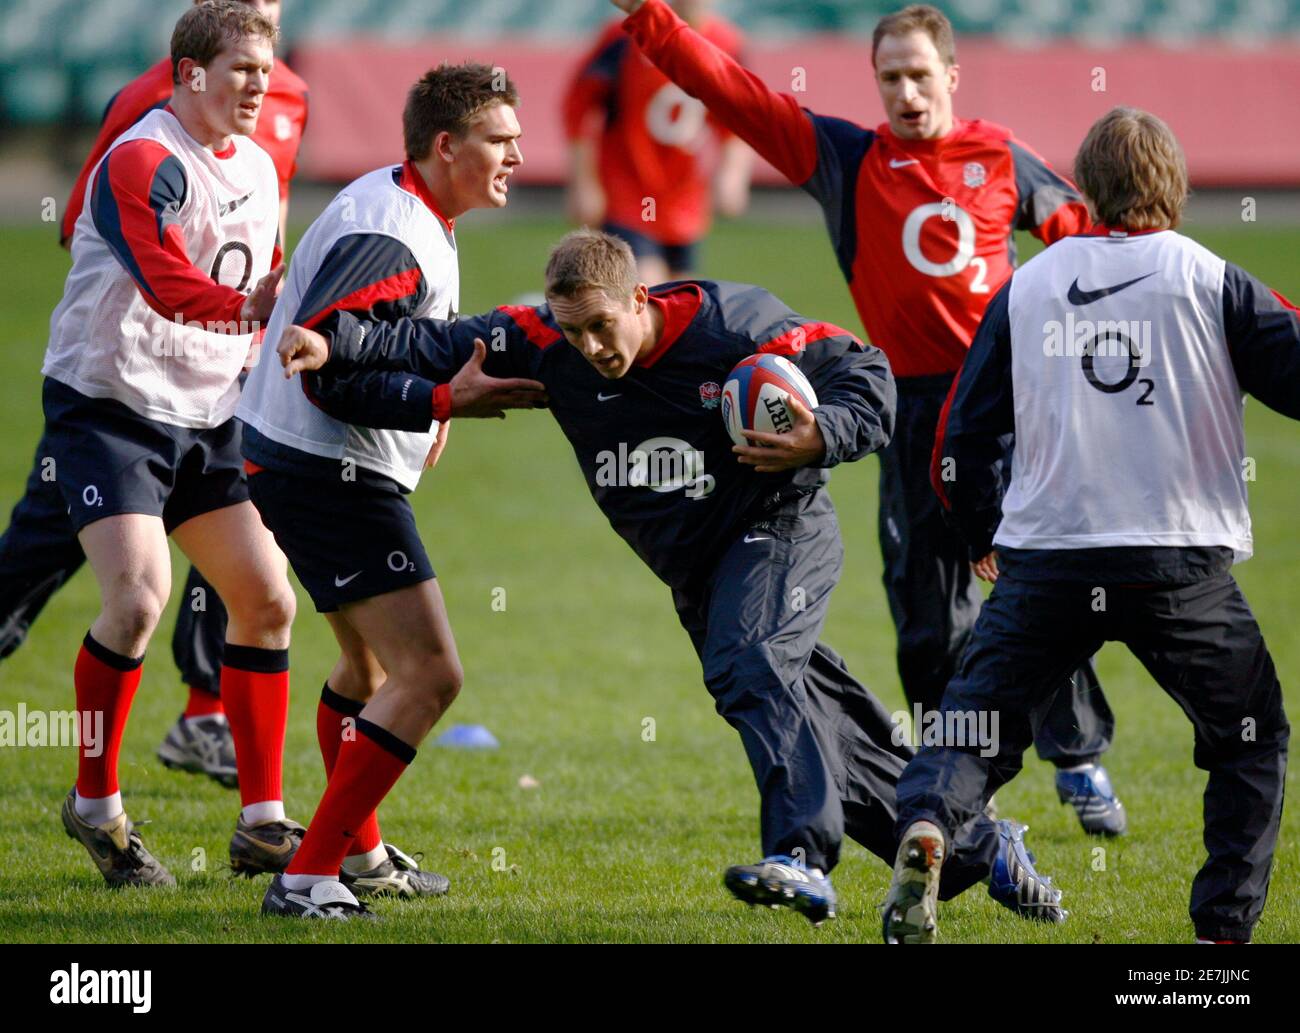 England's Jonny Wilkinson runs with the ball during rugby practice at Twickenham Stadium in London January 23, 2007. Wilkson is named in the England rugby squad to face Scotland in the opening match of their Six Nations campaign which is due to start next week.   REUTERS/Dylan Martinez    (BRITAIN) Stock Photo